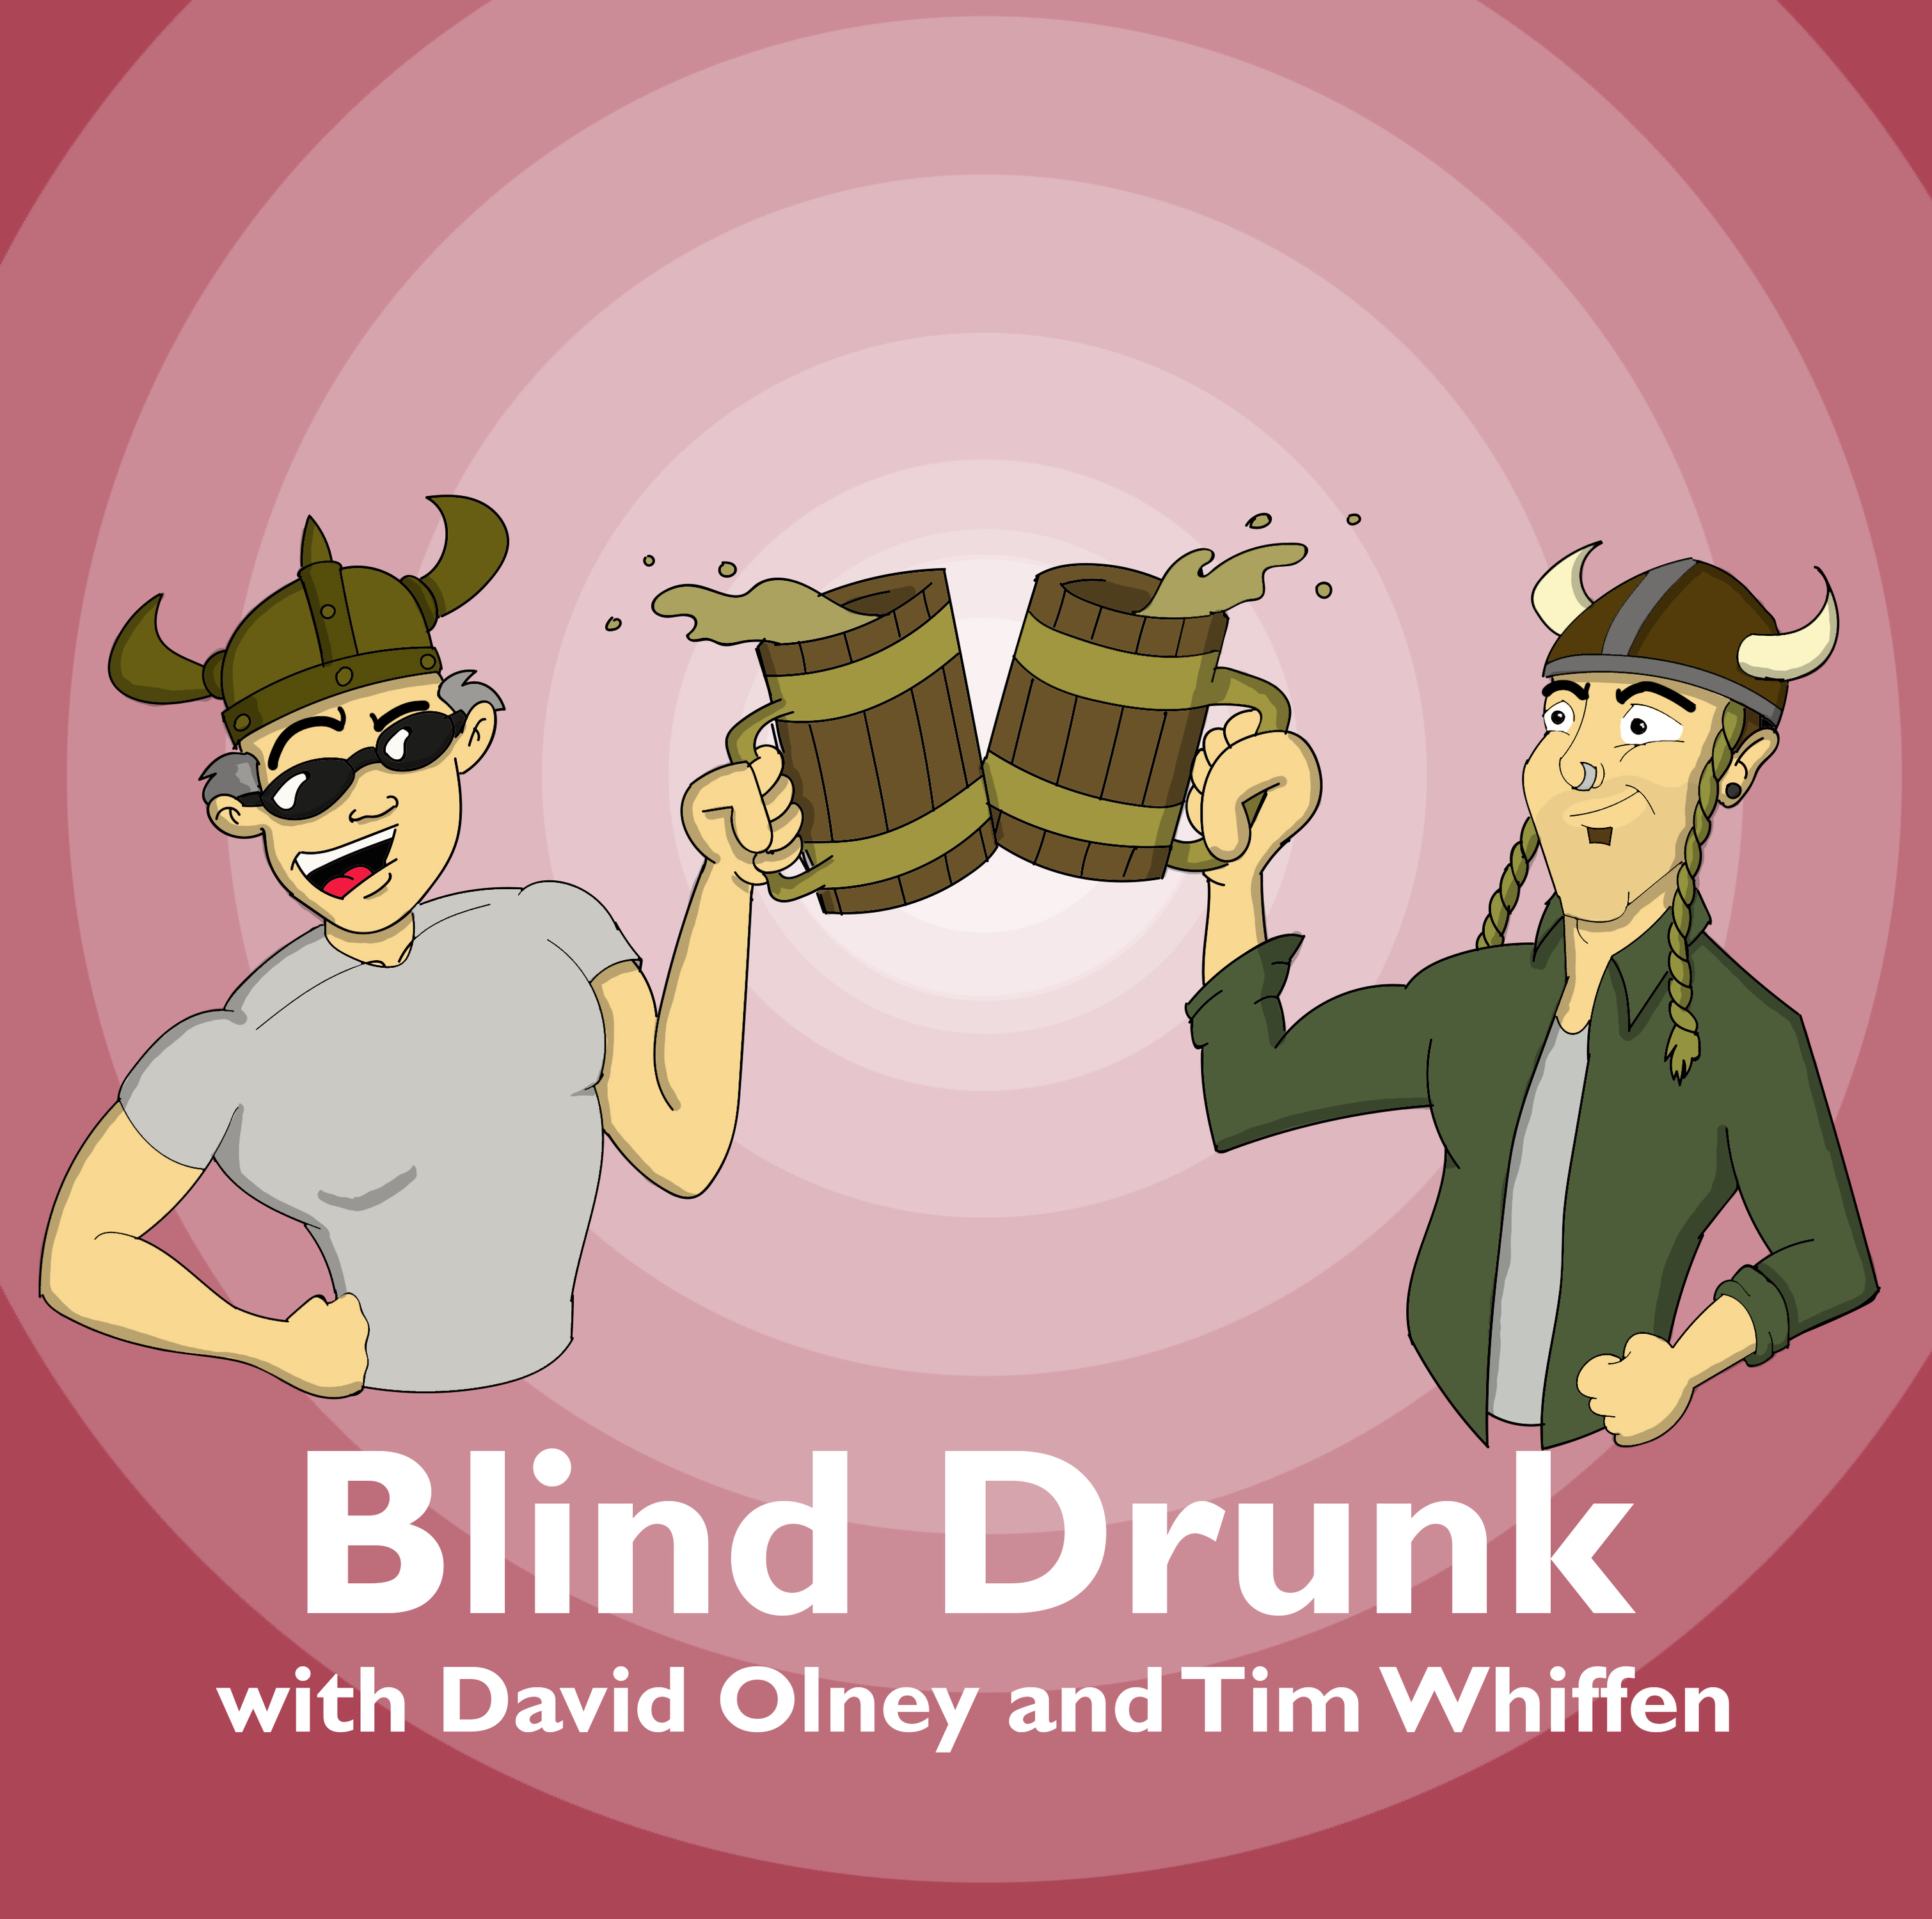 Blind Drunk - Vino, Vicissitudes, and Virtue (With Nigel Dobson and Steve Davis of the Adelaide Show Podcast)